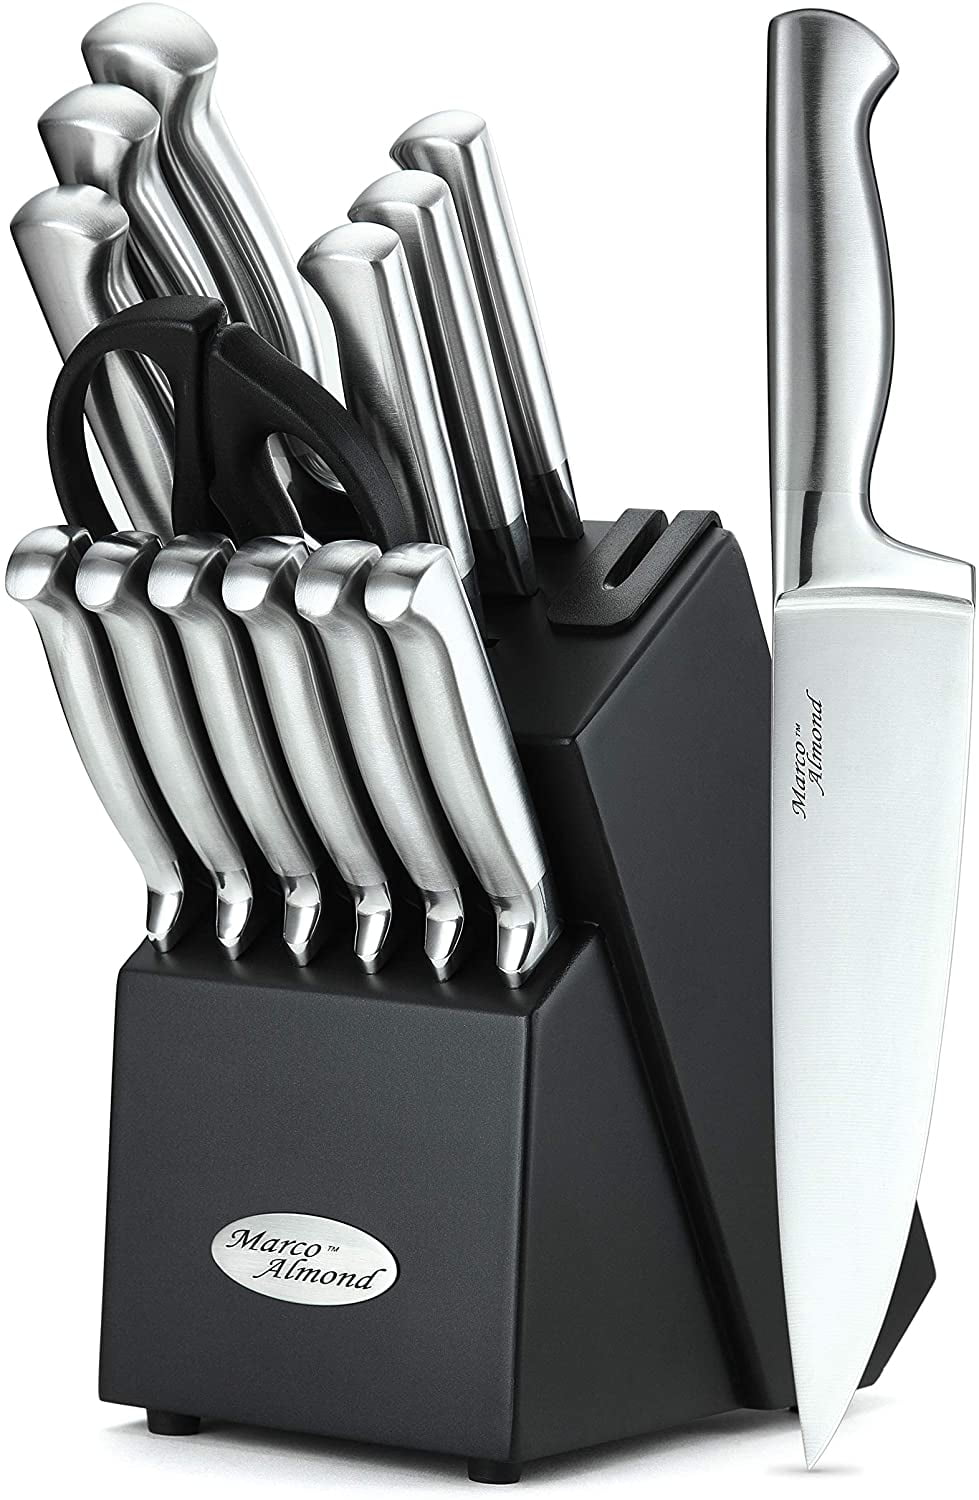 Marco Almond® Kitchen Knife Set with Block KYA31,14 Pieces Japanese  Stainless Steel Cutlery Knives Block Set for Kitchen with Built-in  Sharpener - Yahoo Shopping